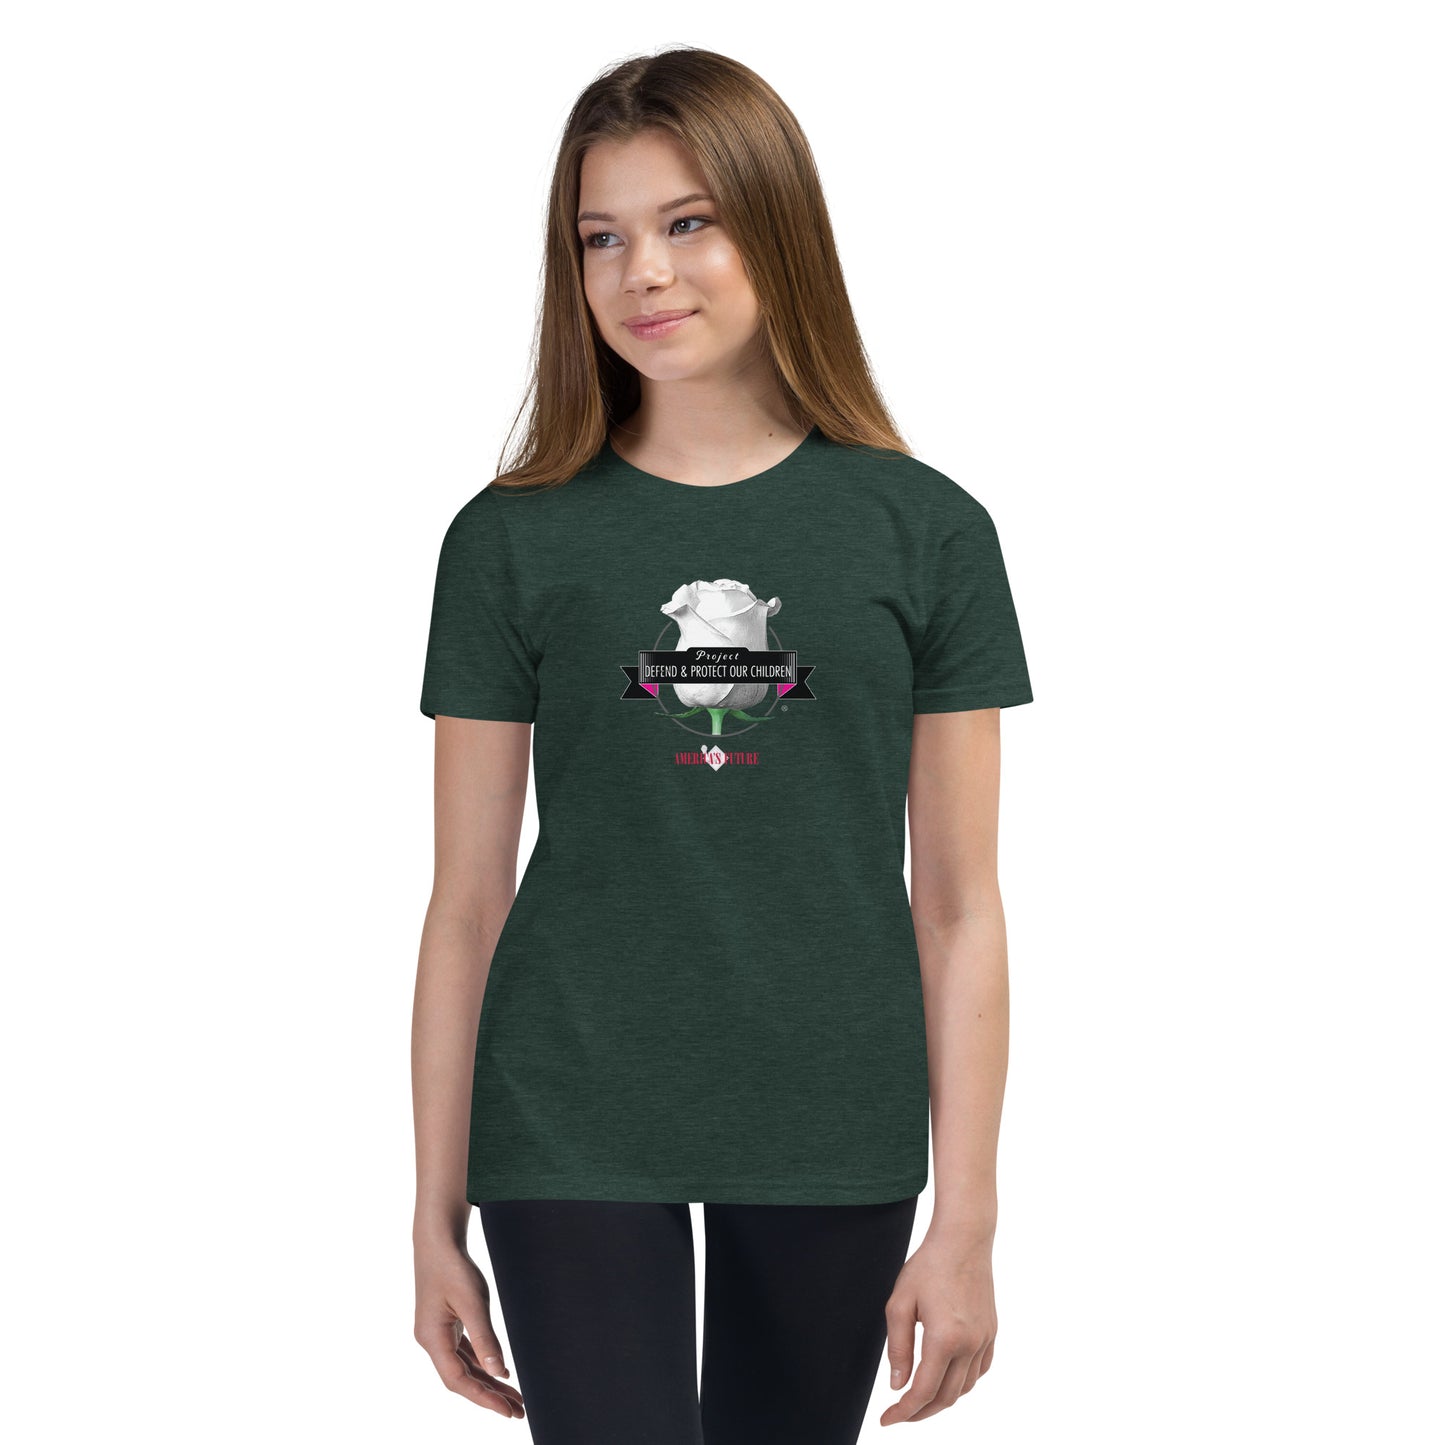 Project Defend & Protect Our Children - Youth Short Sleeve T-Shirt